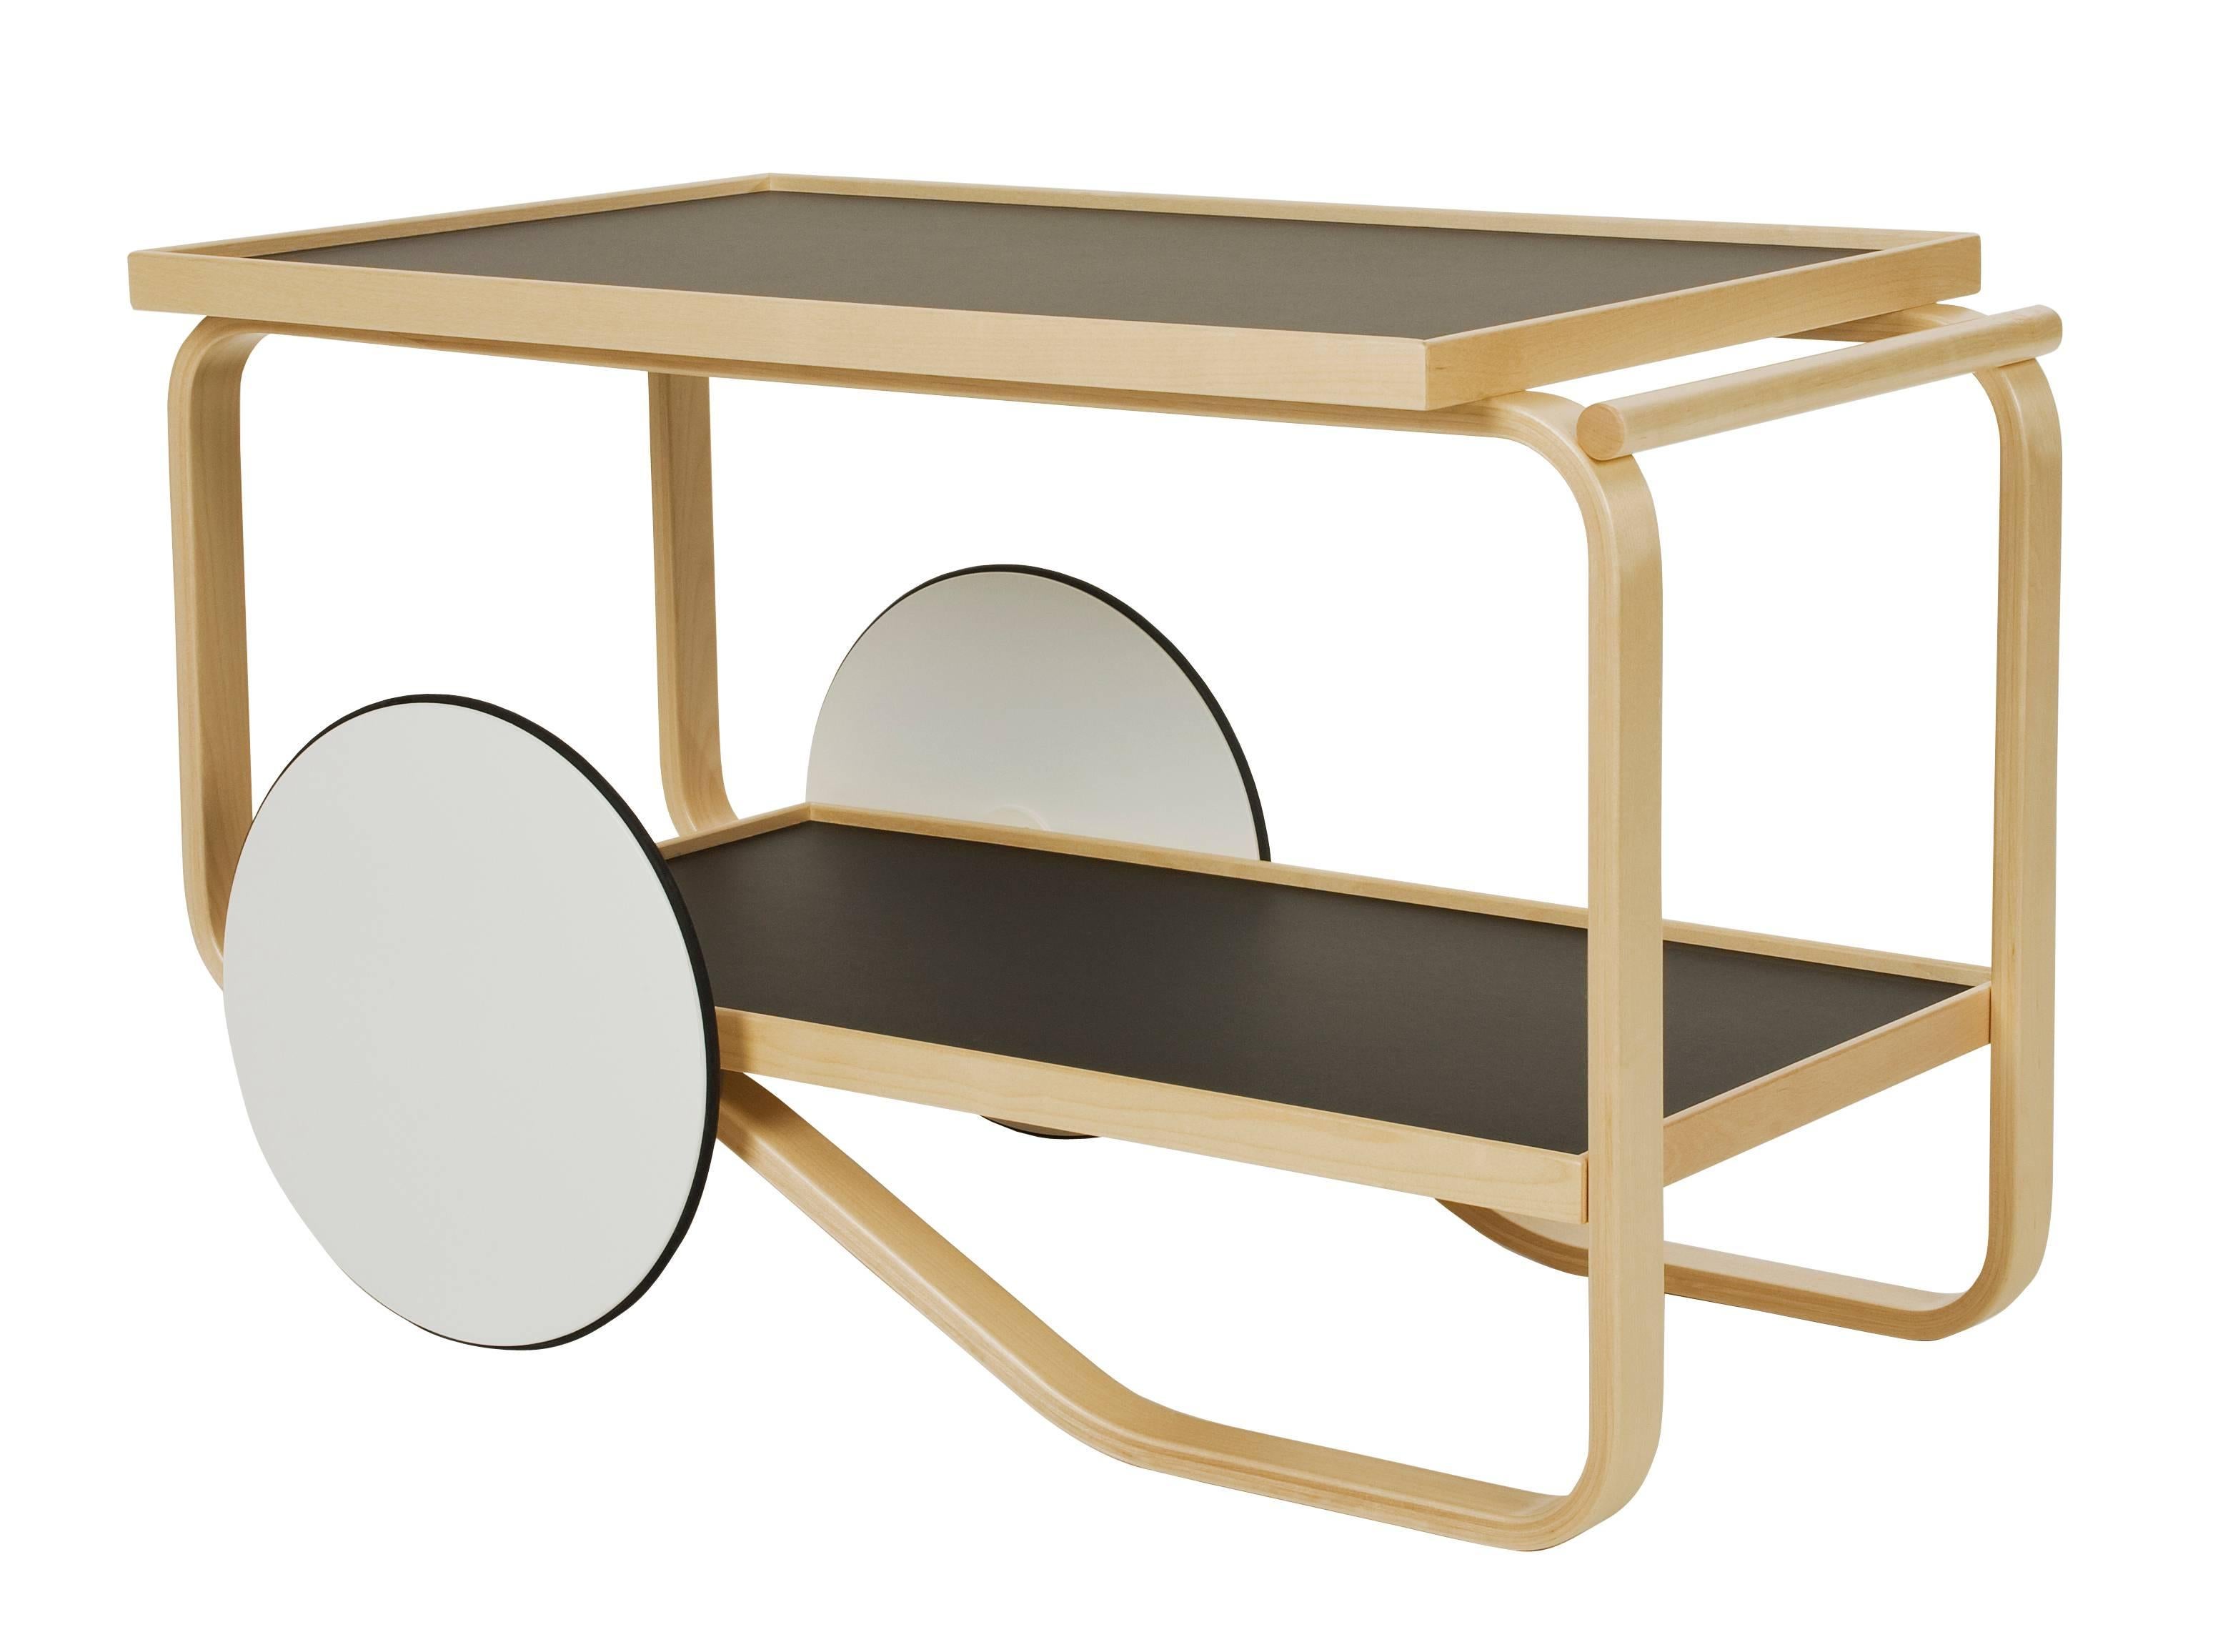 Designed by Alvar Aalto in 1936 and introduced in 1937 at the Paris World’s Fair, the tea trolley utilizes a process invented by Alvar Aalto for bending thick layers of birch into gracefully curved loops to create strong, light frames.

Aalto